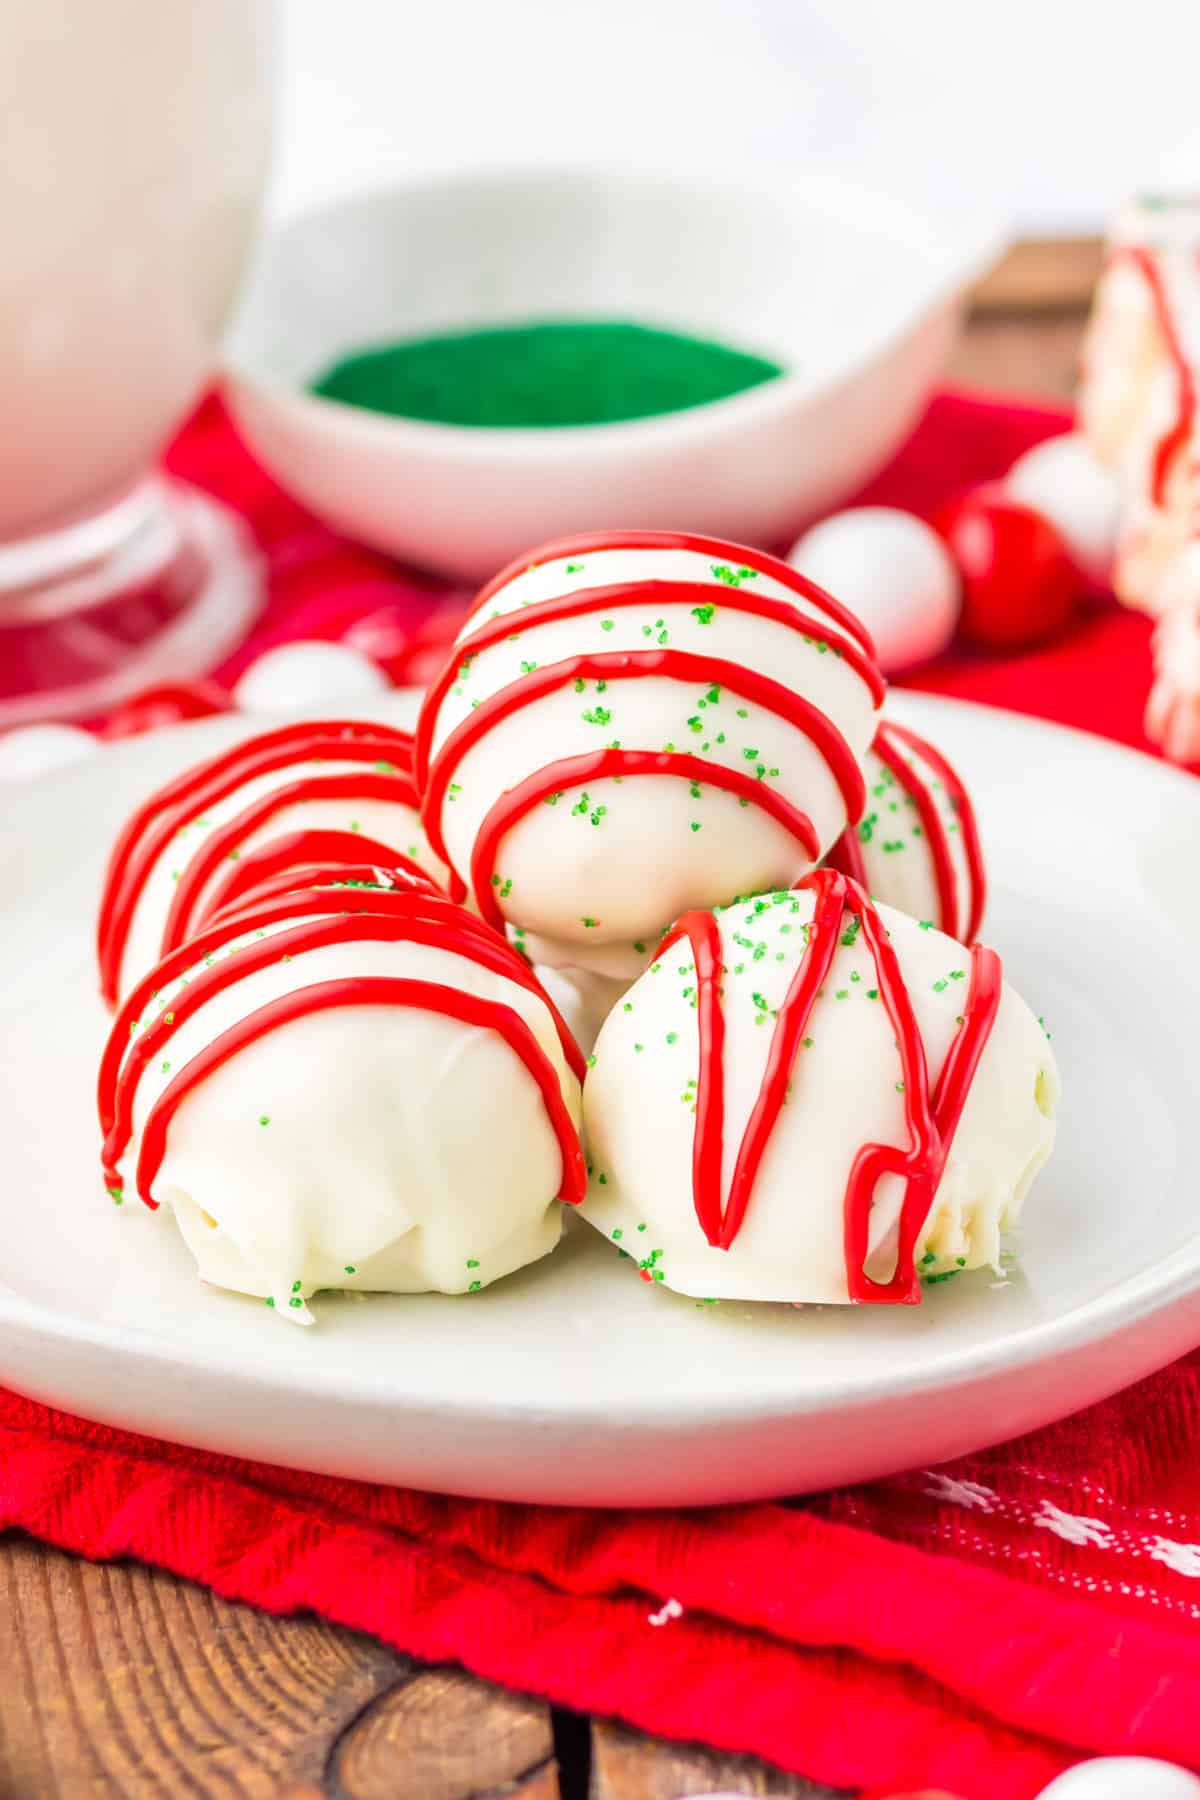 Little Debbie Christmas Tree Cake Balls on white plate with green sanding sugar and glass of milk behind them.